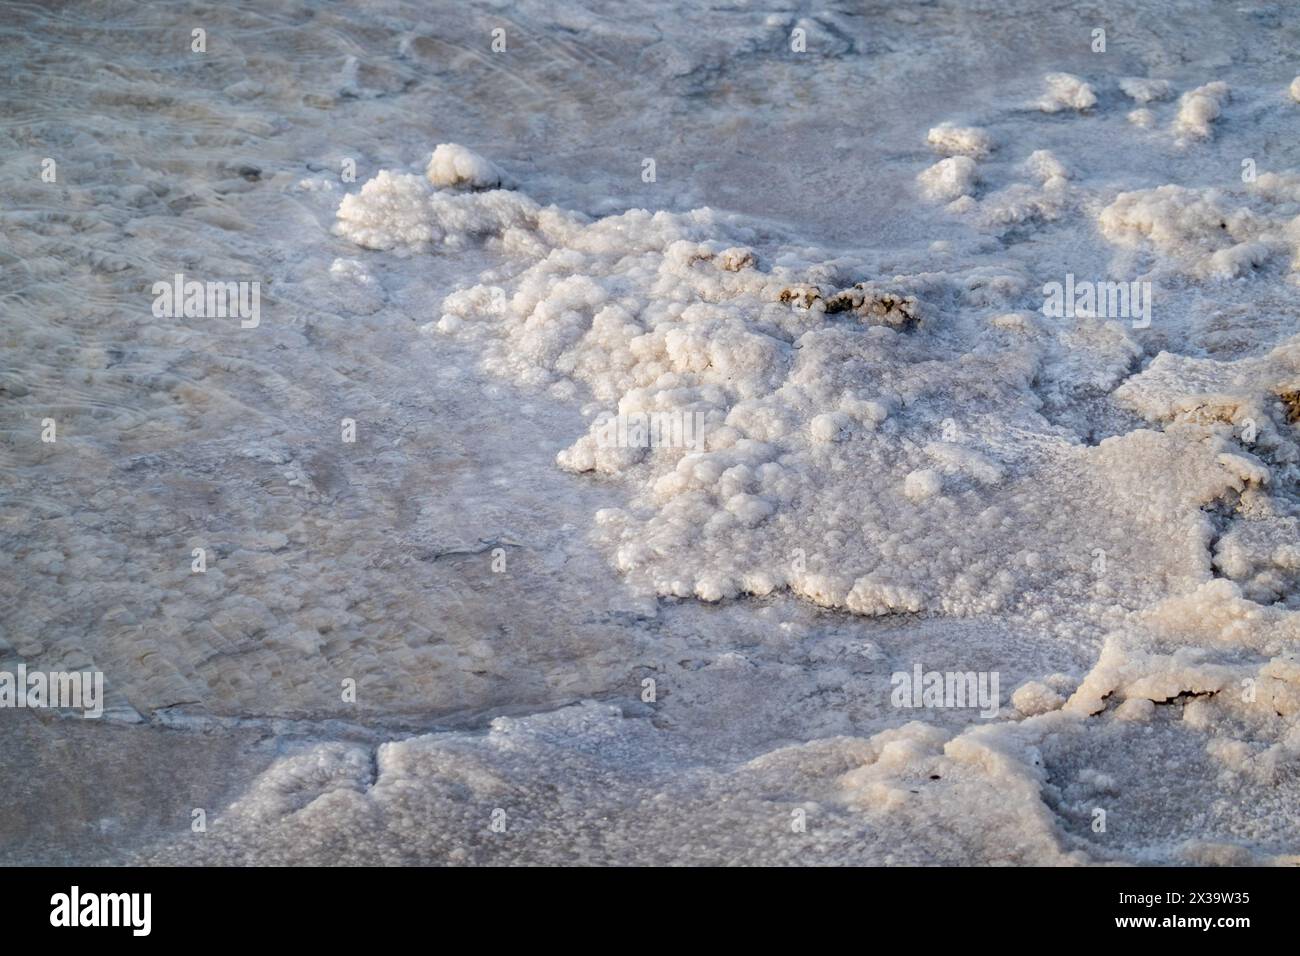 Close-up view of white, natural salt formations on the shallow, crystalline surface of a saltwater body, showcases textures and patterns formed by salt. Stock Photo